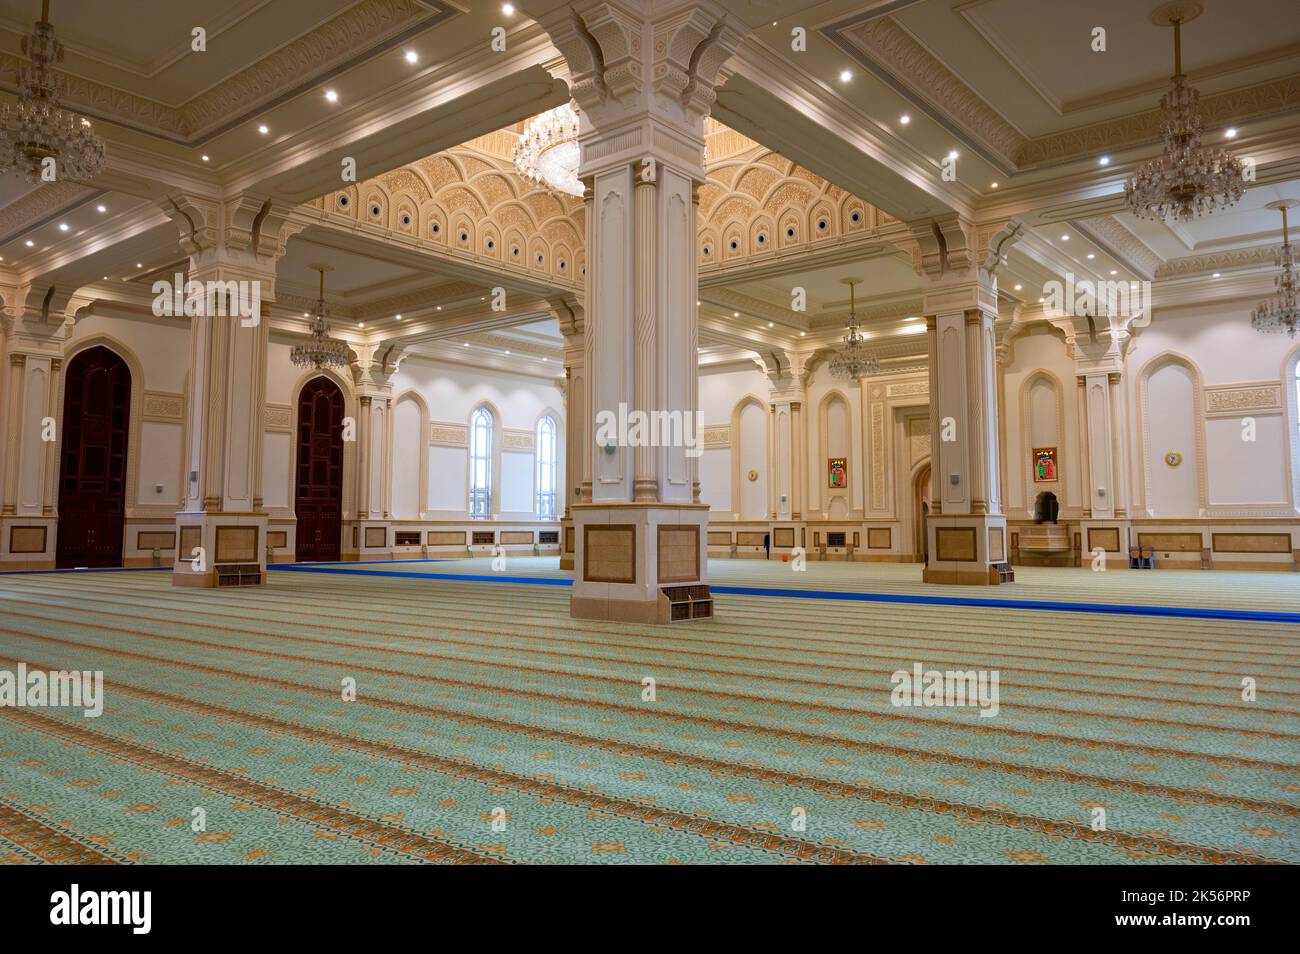 Sultan Qaboos mosque in the centre of Salalah, Oman Stock Photo